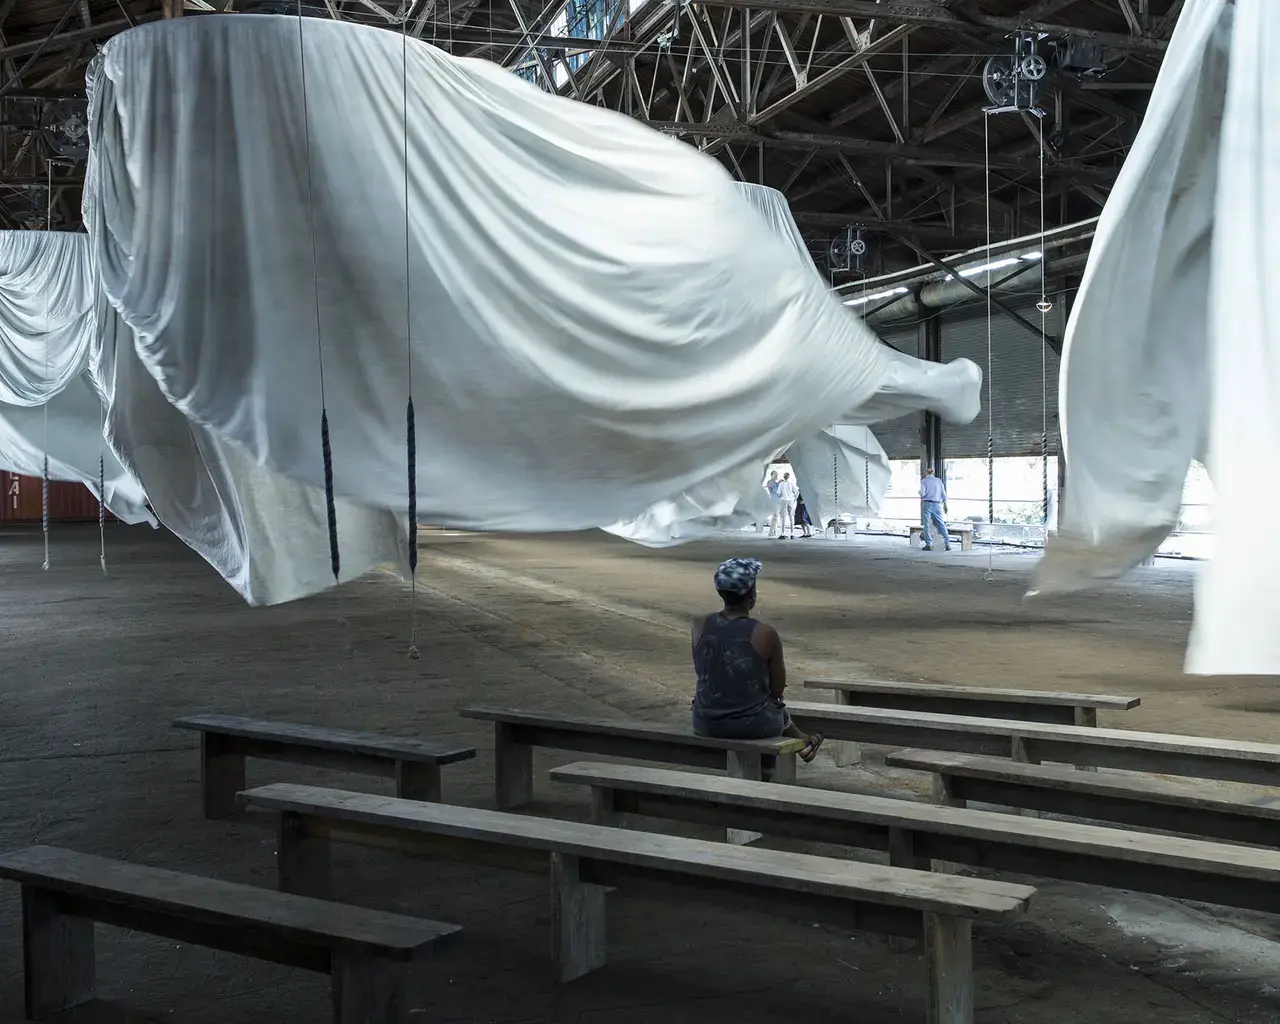 Ann Hamilton, habitus, 2016. Installation at Municipal Pier 9, made in collaboration with The Fabric Workshop and Museum, Philadelphia. Photo by Thibault Jeanson.&nbsp;